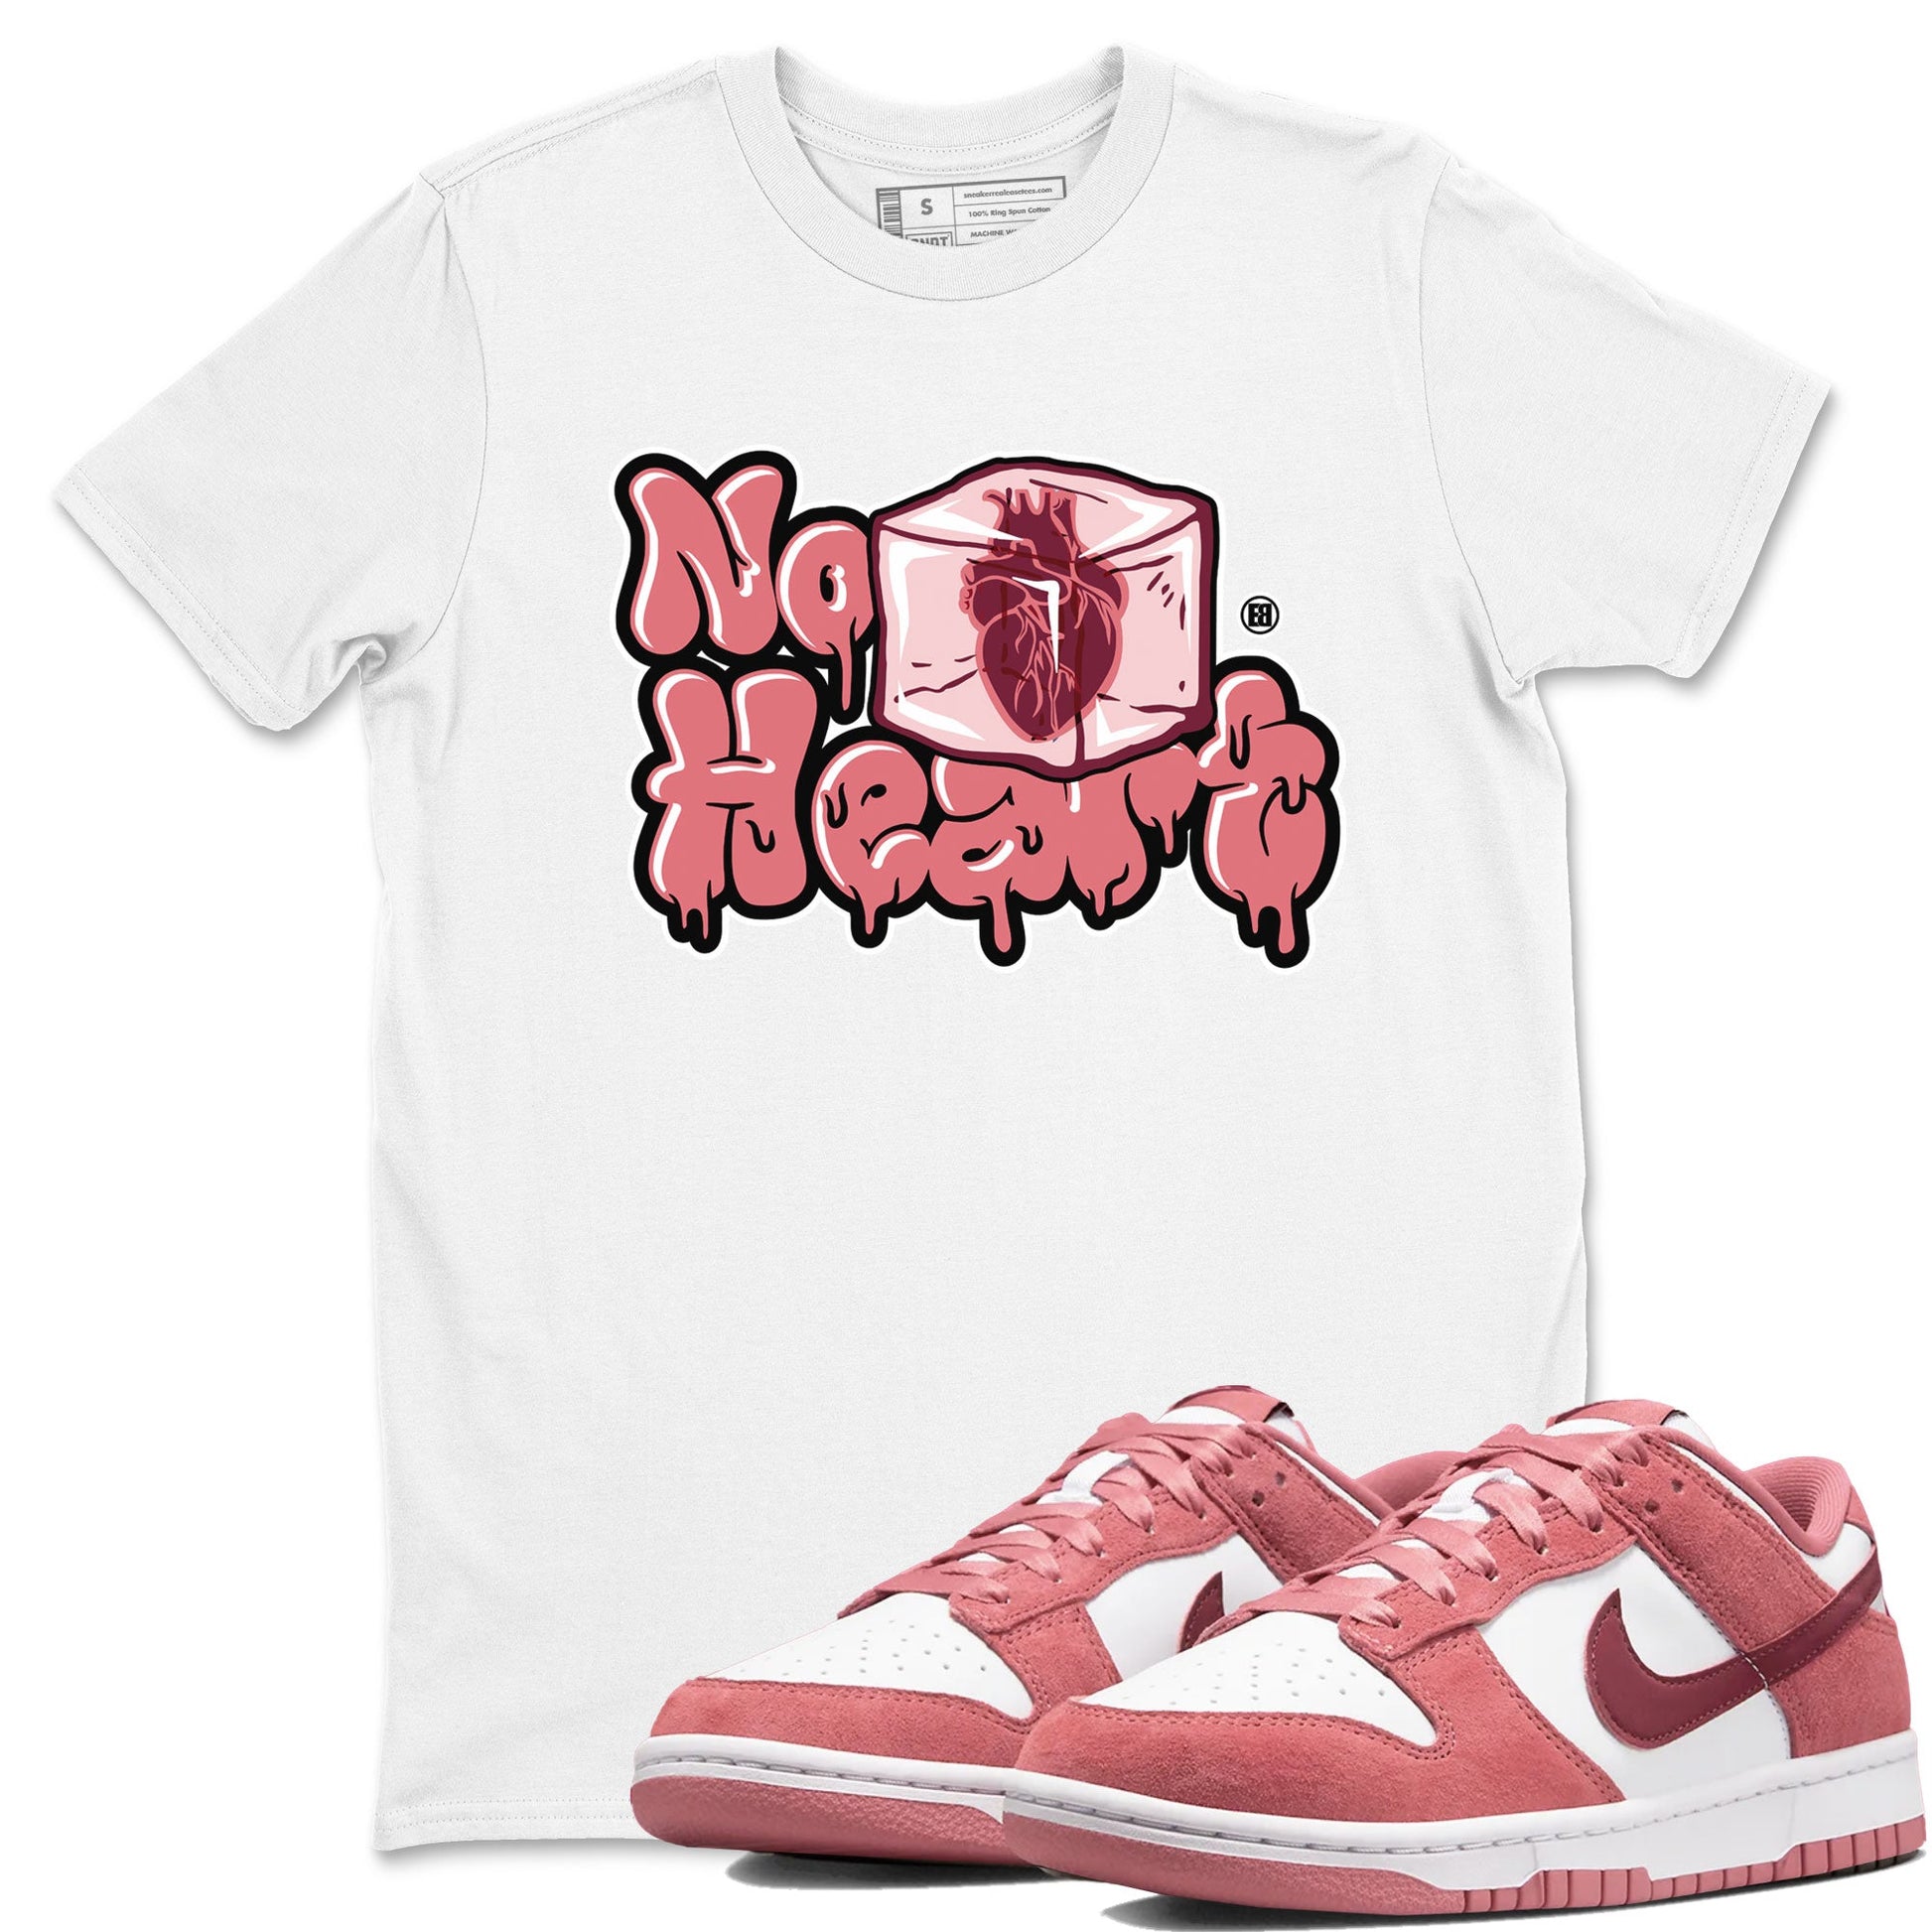 Dunk Valentines Day shirt to match jordans No Hearts sneaker tees Dunk Low Valentine's Day SNRT Sneaker Release Tees Cotton Sneaker Tee White 1 T-Shirt